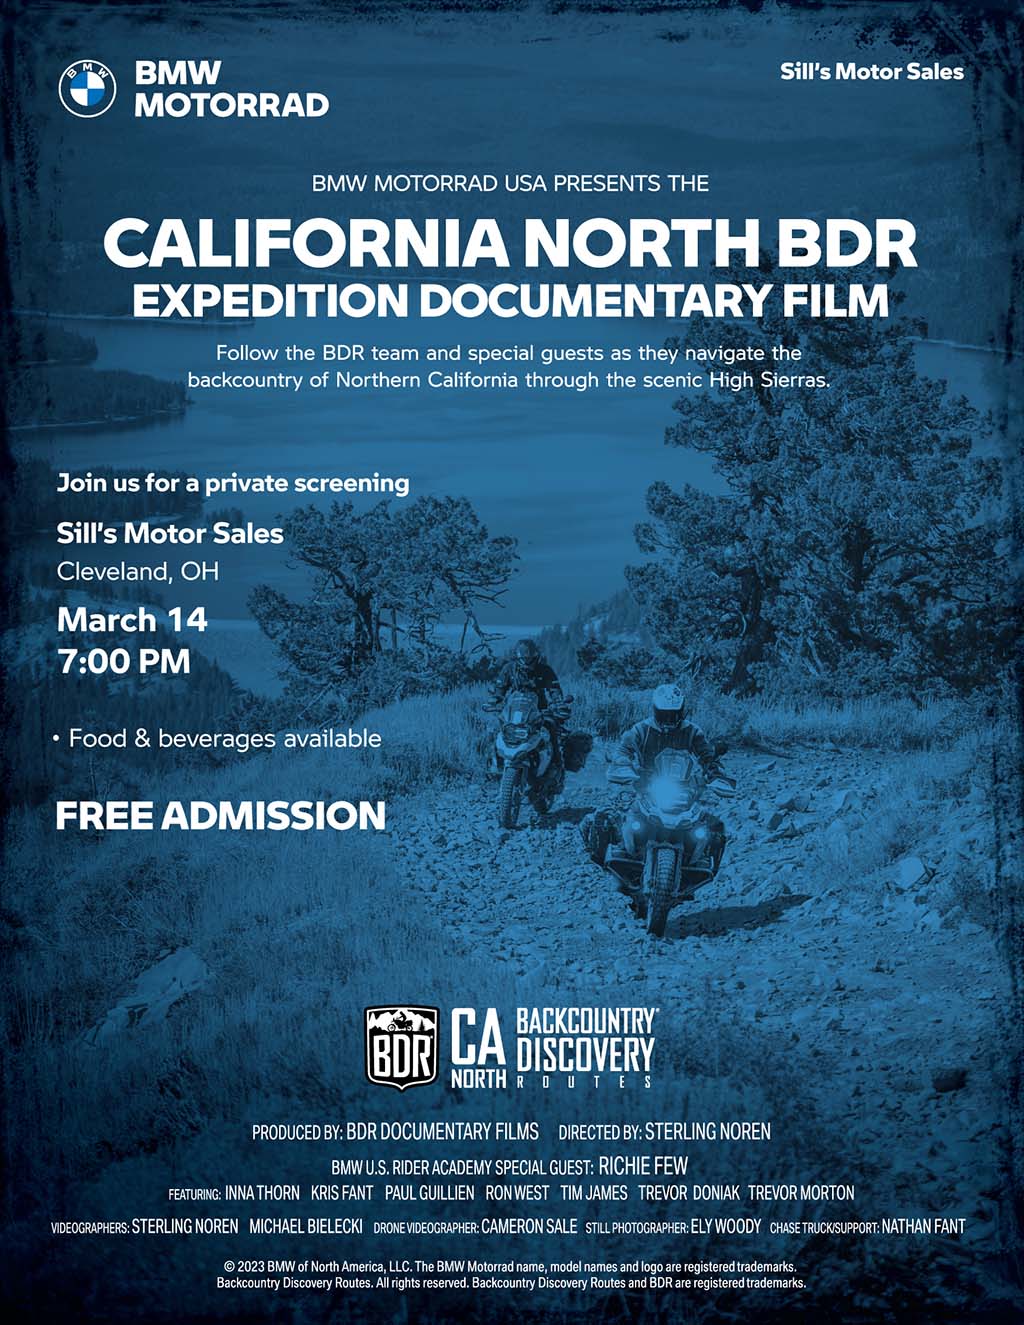 California North BDR Expedition Documentary Screening